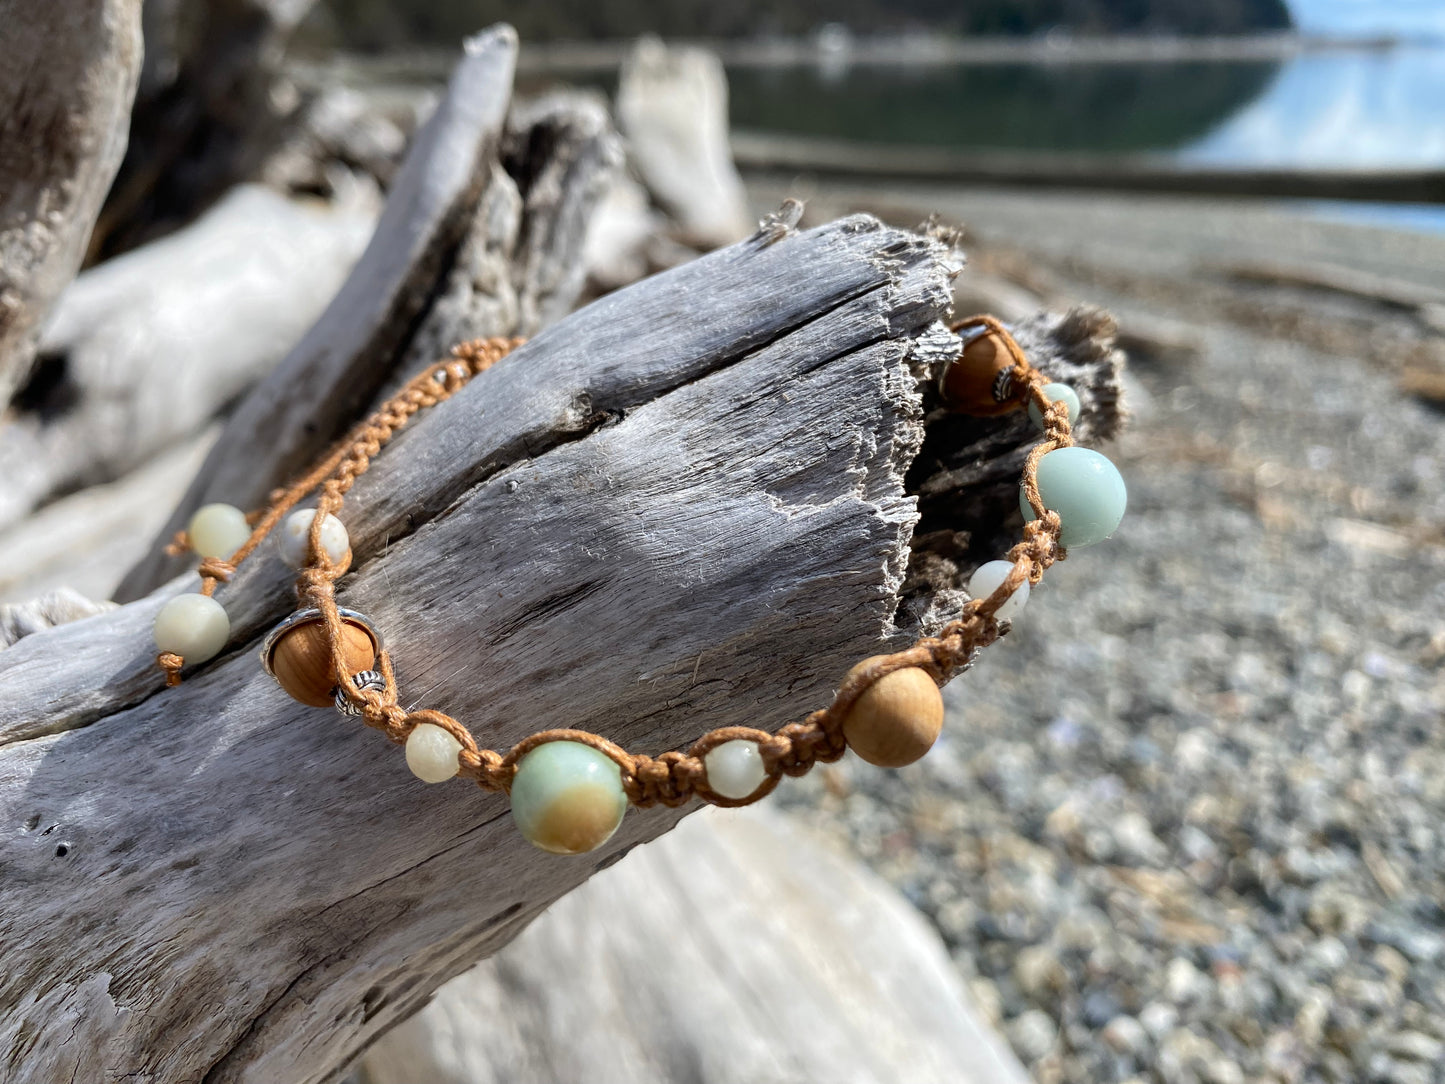 Beautiful Boho Braided Rustica Bracelet for any beach girl, sitting on a piece of driftwood with the ocean in the background